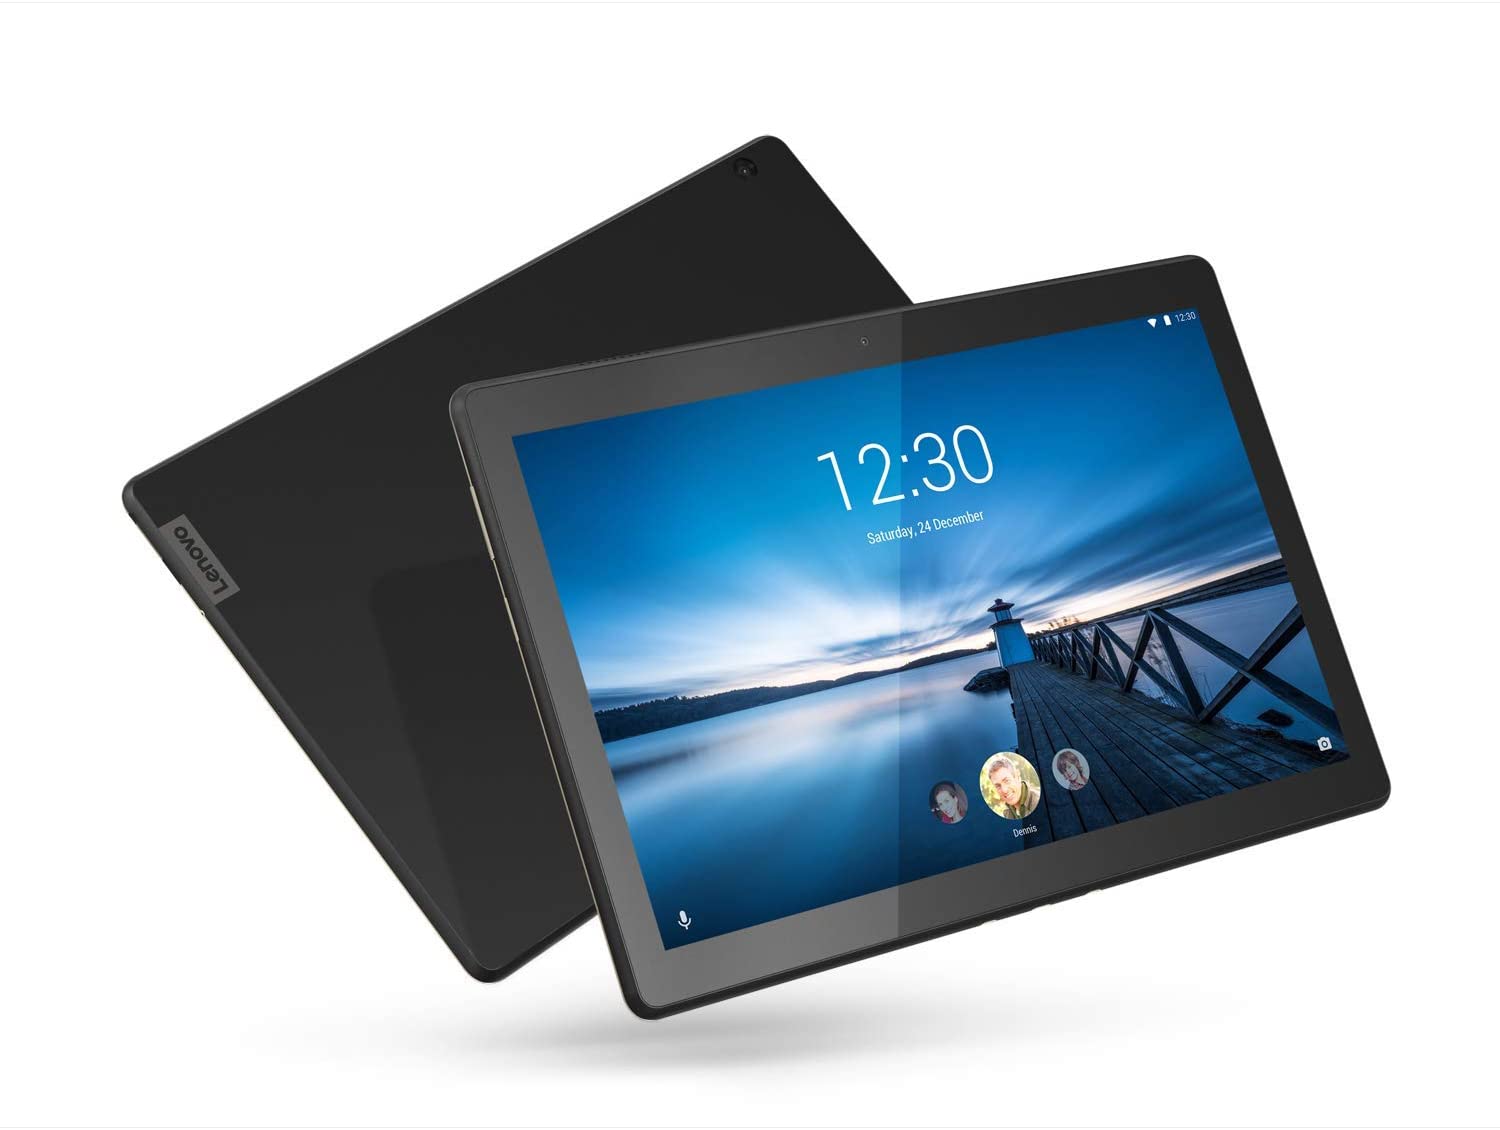 Lenovo Smart Tab M10 10.1 Android Tablet, Alexa-Enabled Smart Device with Smart Dock Featuring 2 Dolby Atmos Speakers - 16GB Storage with Alexa Enabled Charging Dock Included